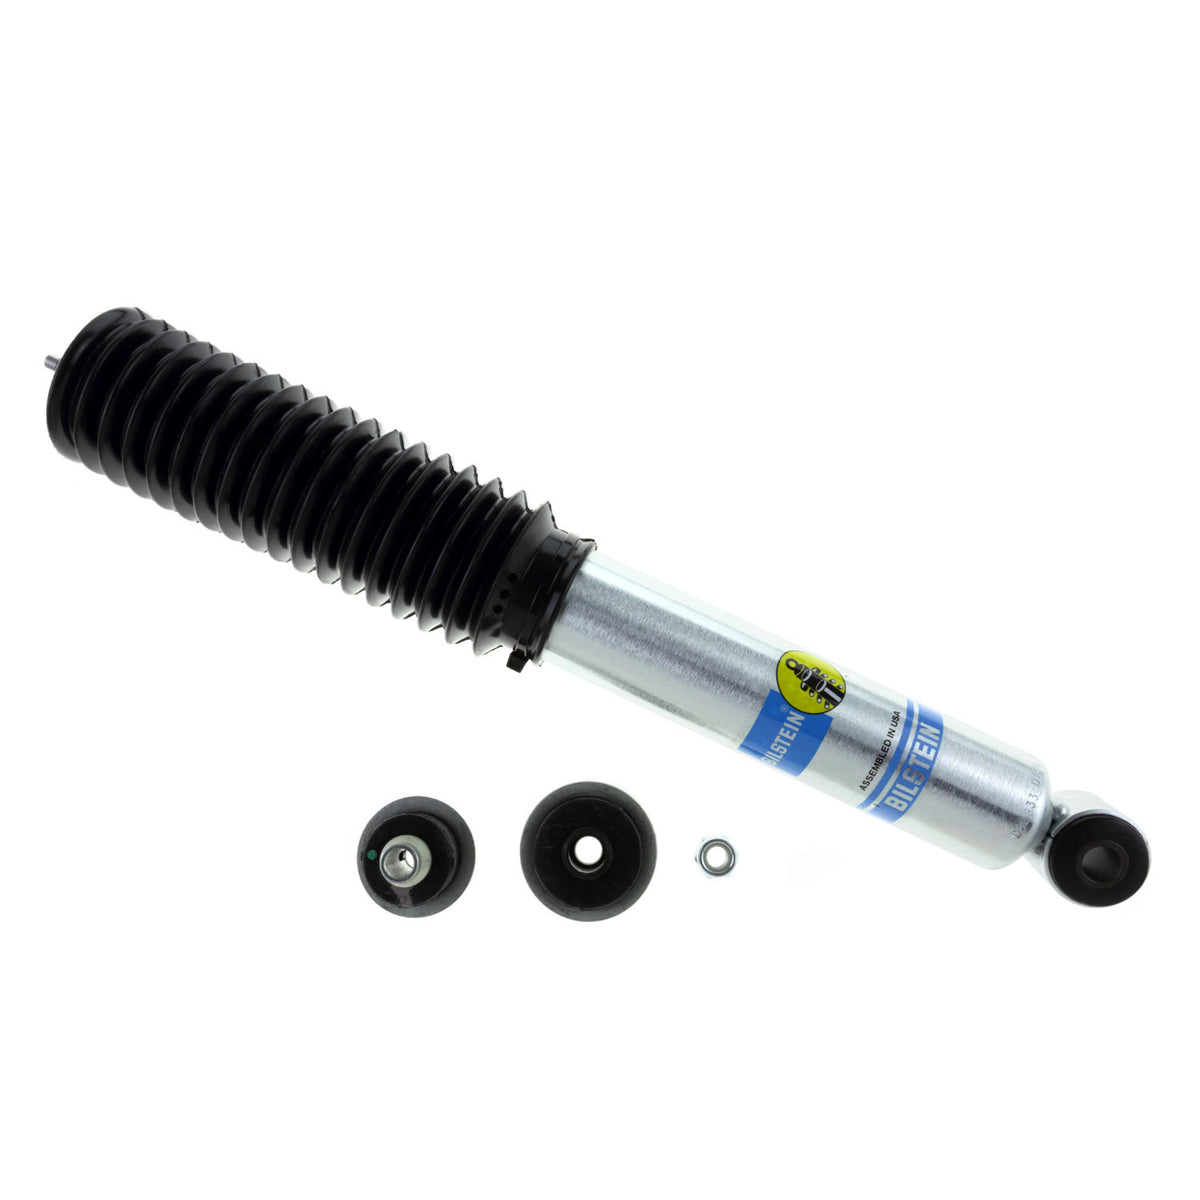 Bilstein B8 5100 Series Shock, 24-186735 Front for Chevy/GMC (various)